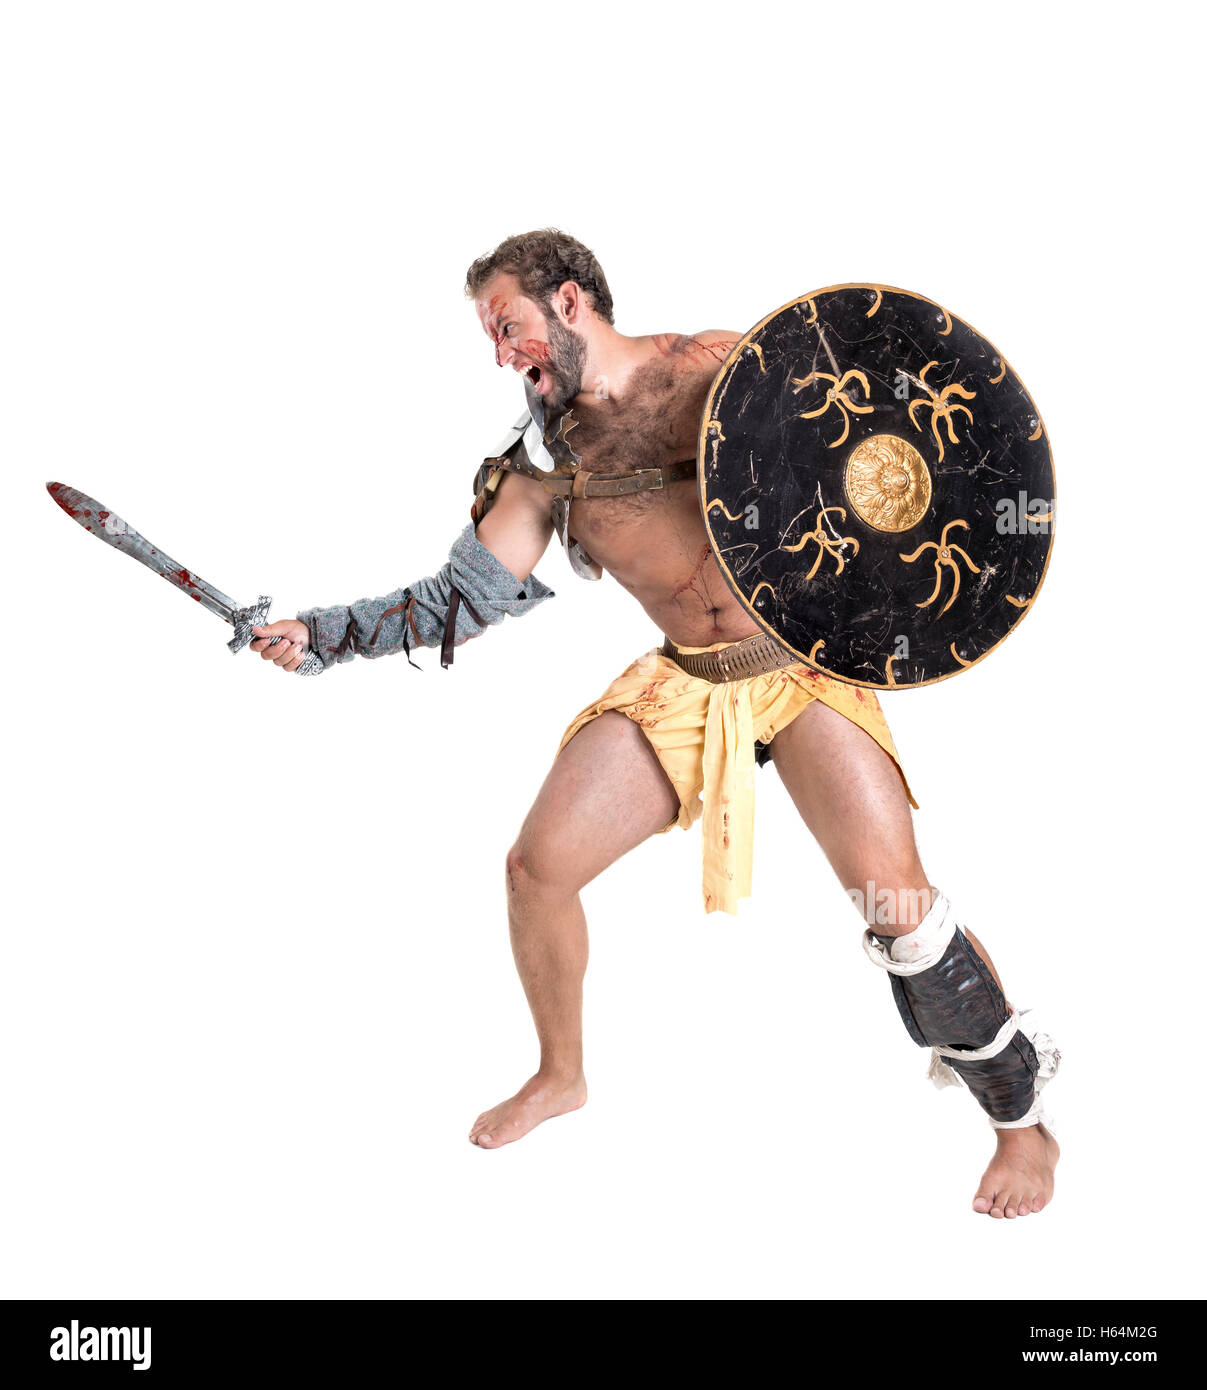 Gladiator arena Cut Out Stock Images & Pictures - Alamy